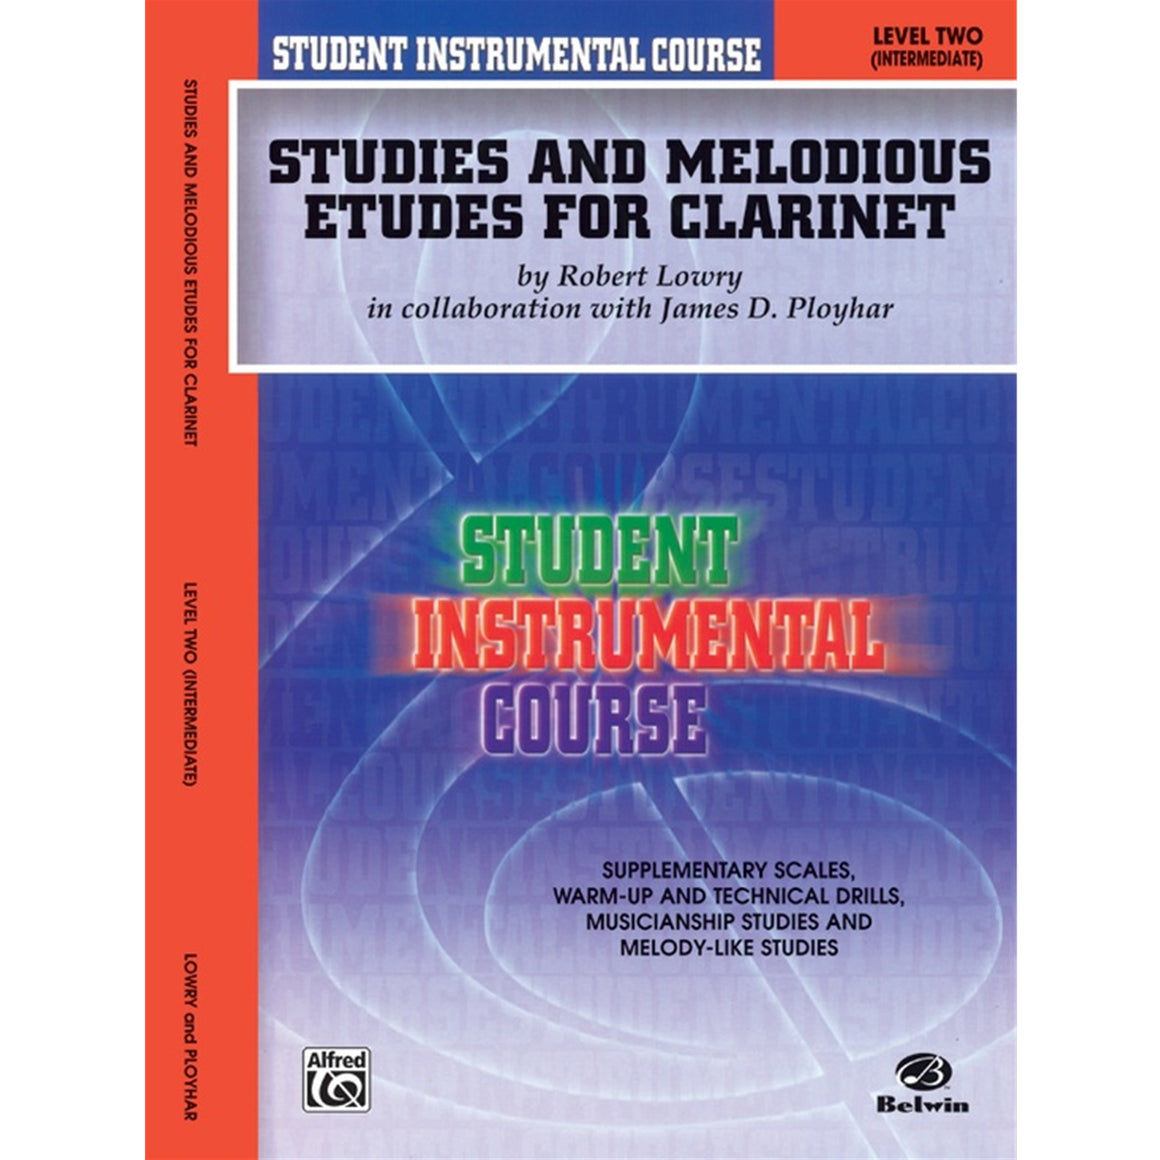 ALFRED 00BIC00207A Student Instrumental Course: Studies and Melodious Etudes for Clarinet, Level II [Clarinet]